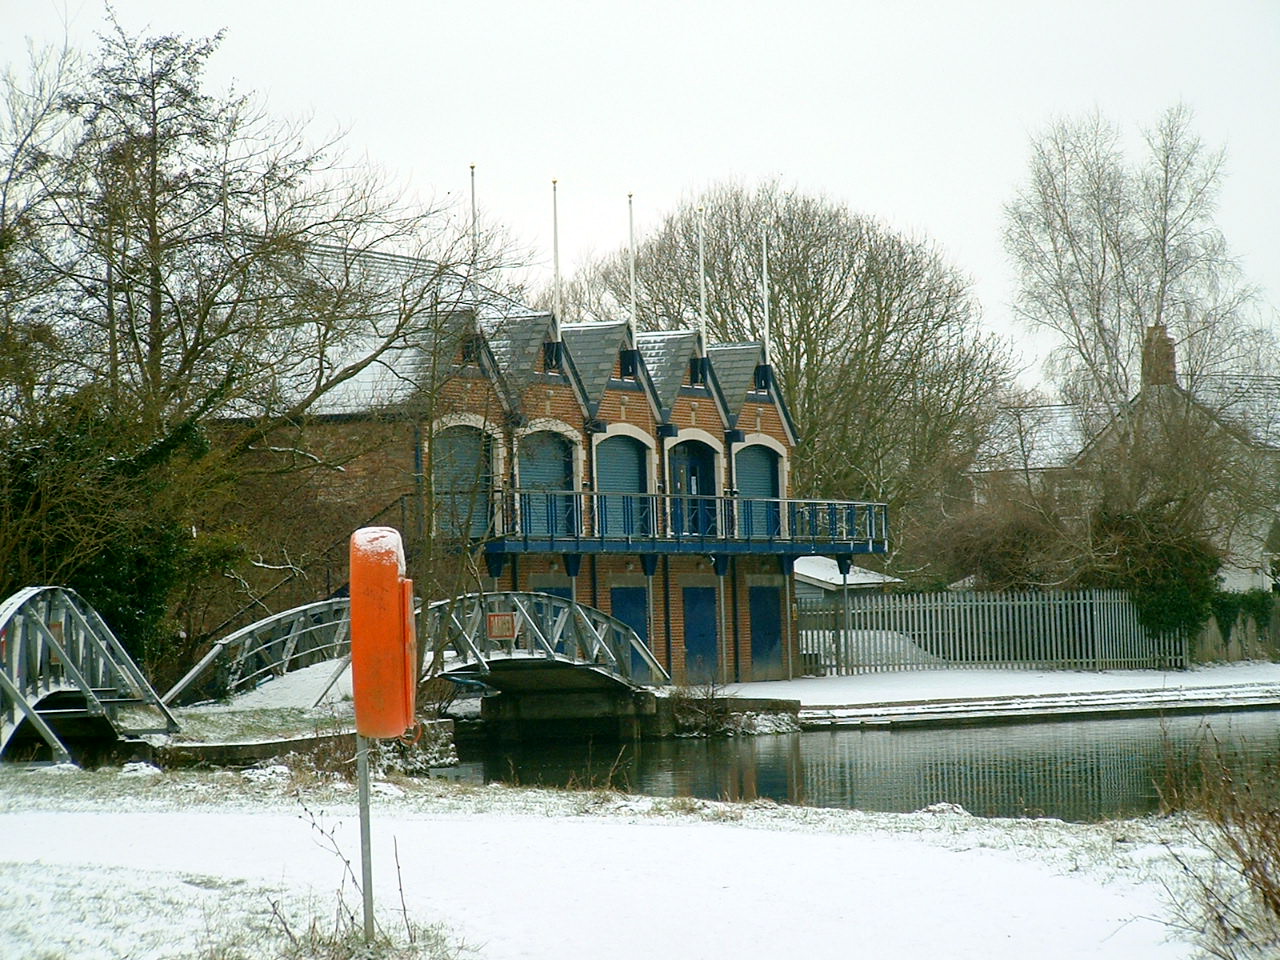 [Boathouse in Snow]